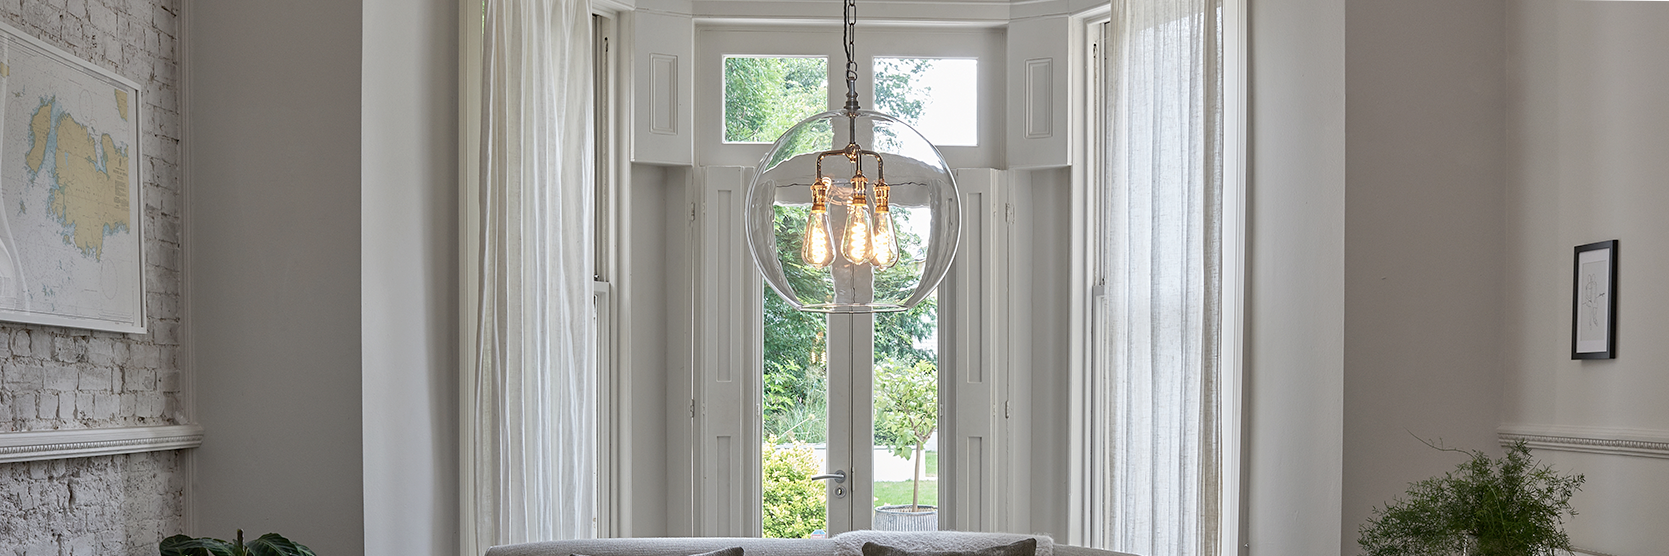 Clear glass globe lighting. featured within a light and airy living room setting.